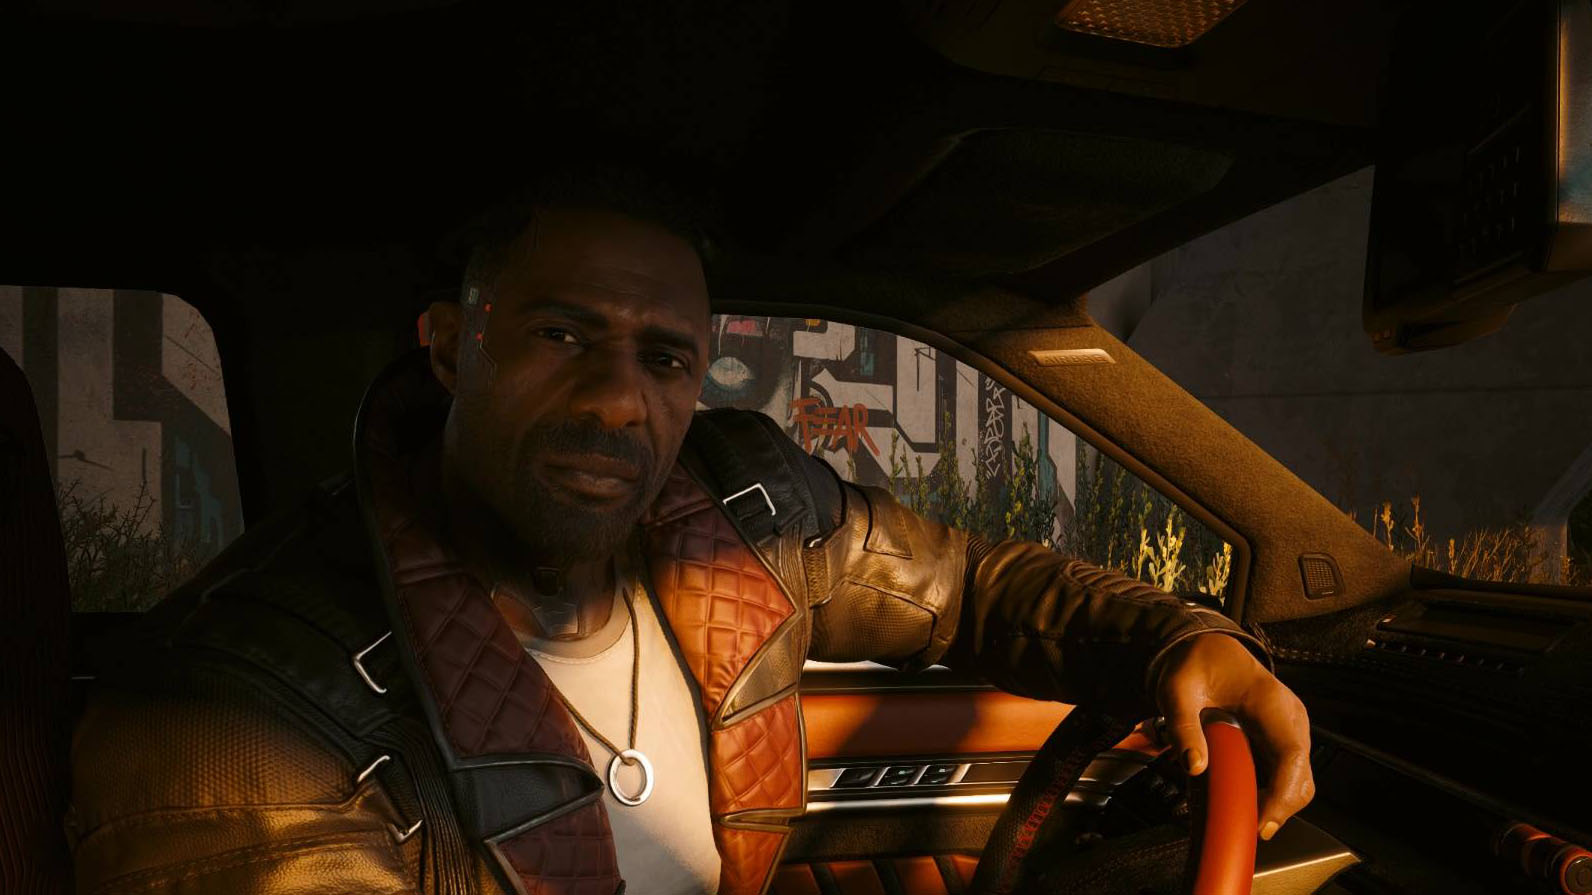 Solomon Reed stares at V while driving a car in Cyberpunk 2077: Phantom Liberty.